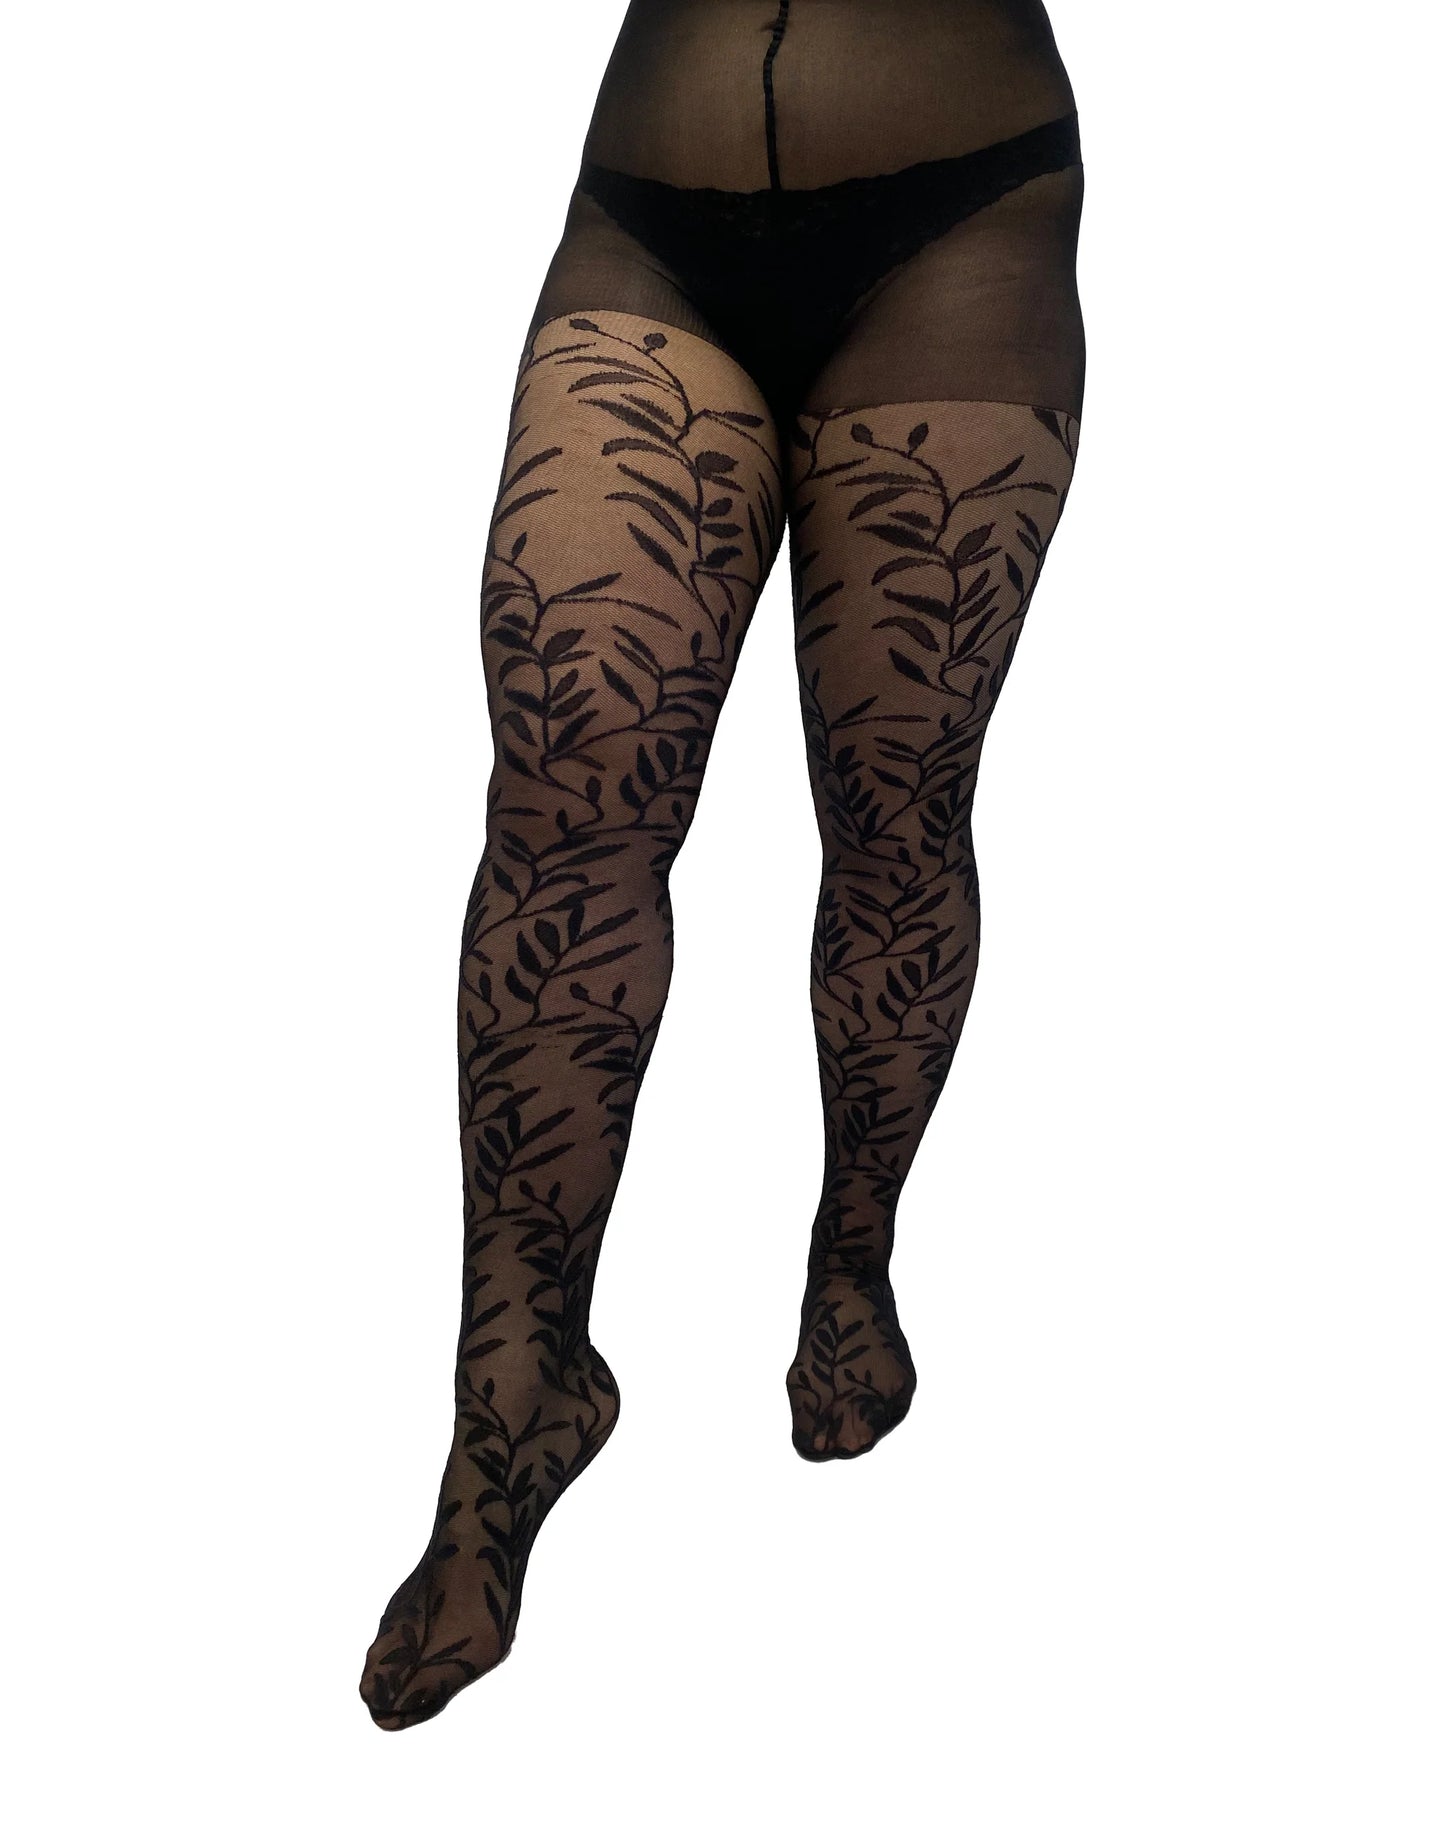 Pamela Mann Leaf Pattern Curvy Tights - Sheer black micro mesh curvy fashion tights with a woven vine leaf style pattern and deep boxer brief.